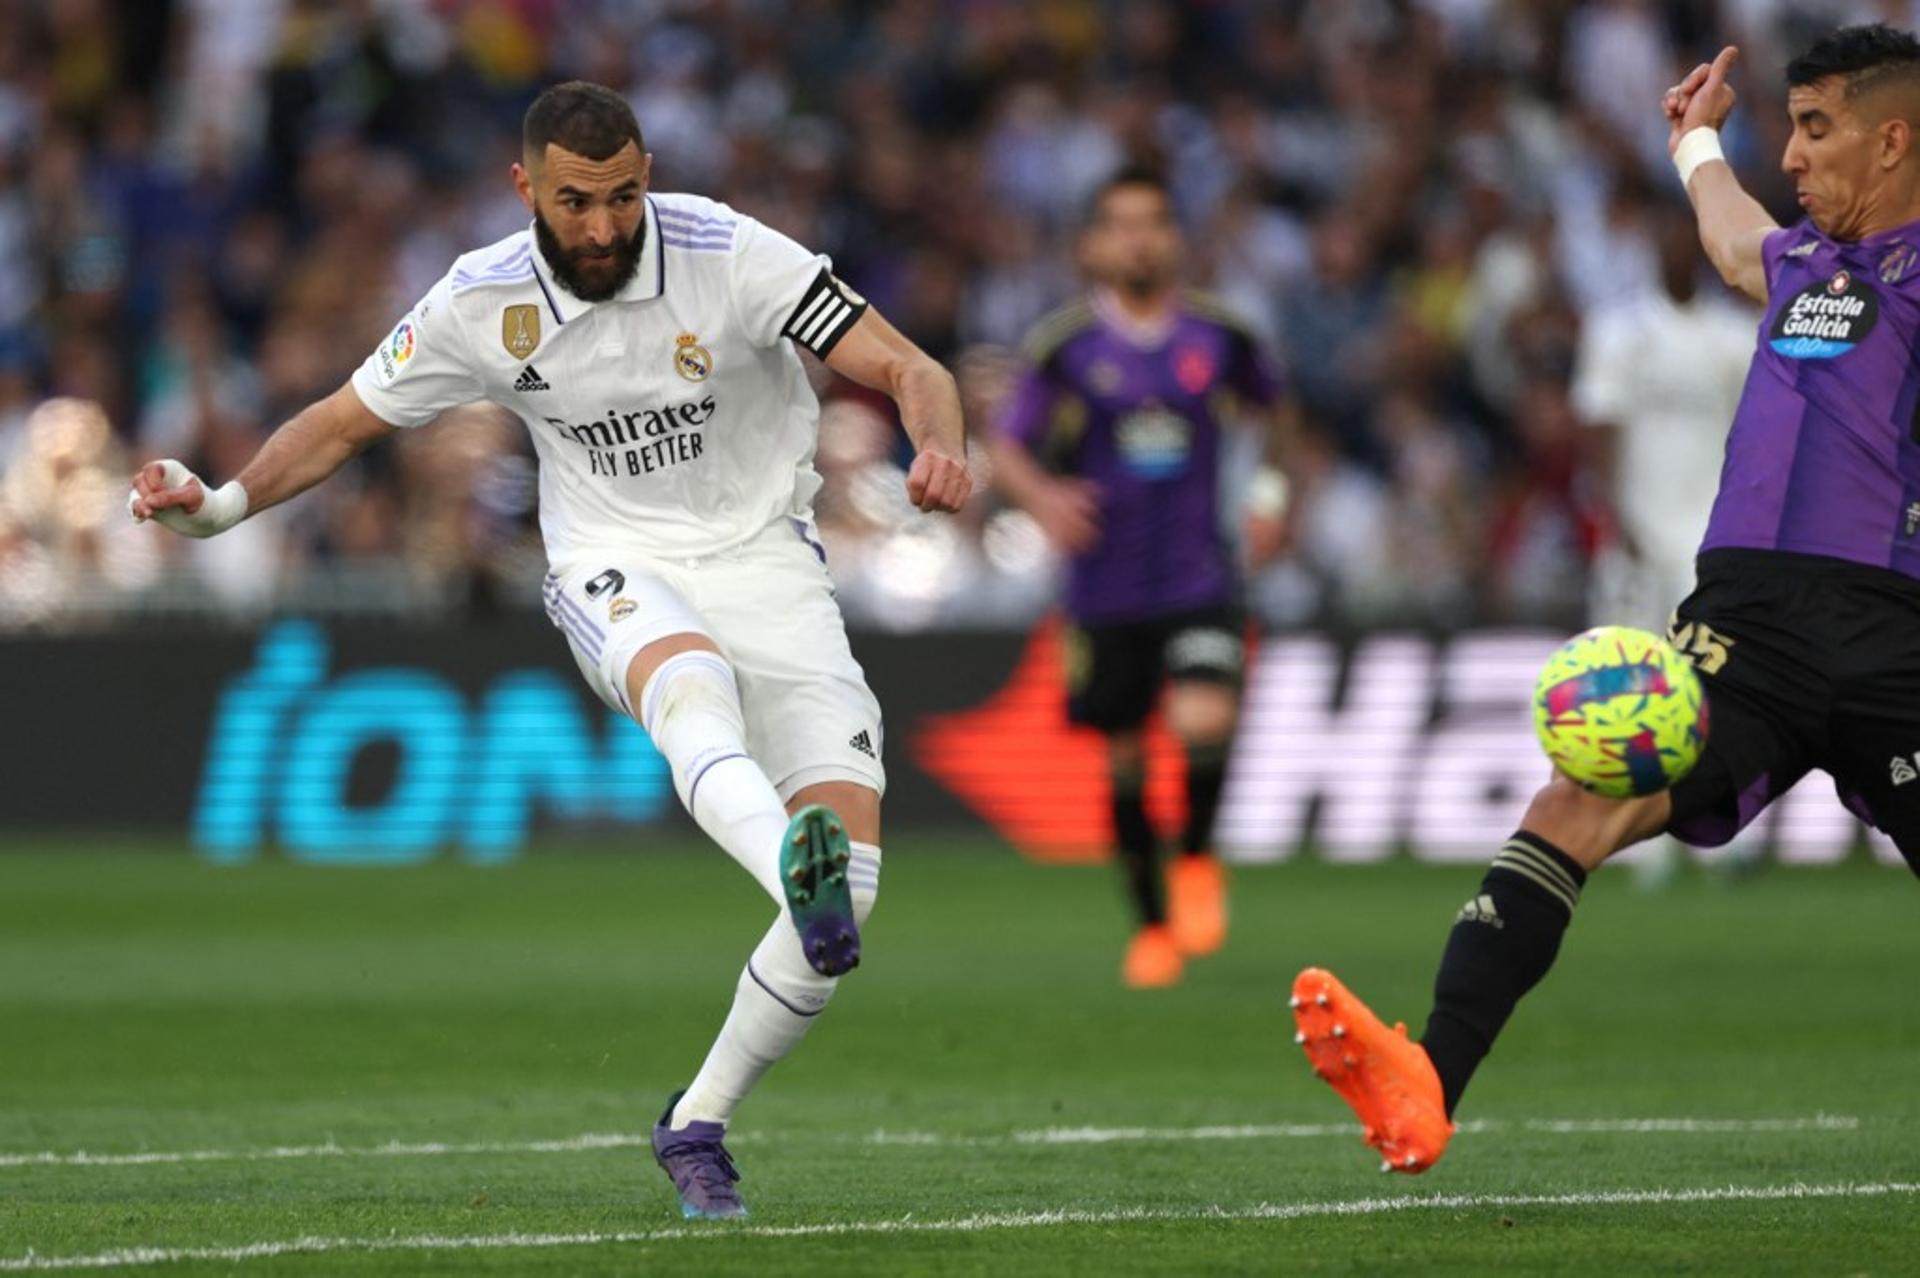 Real Madrid x Real Valladolid - Benzema